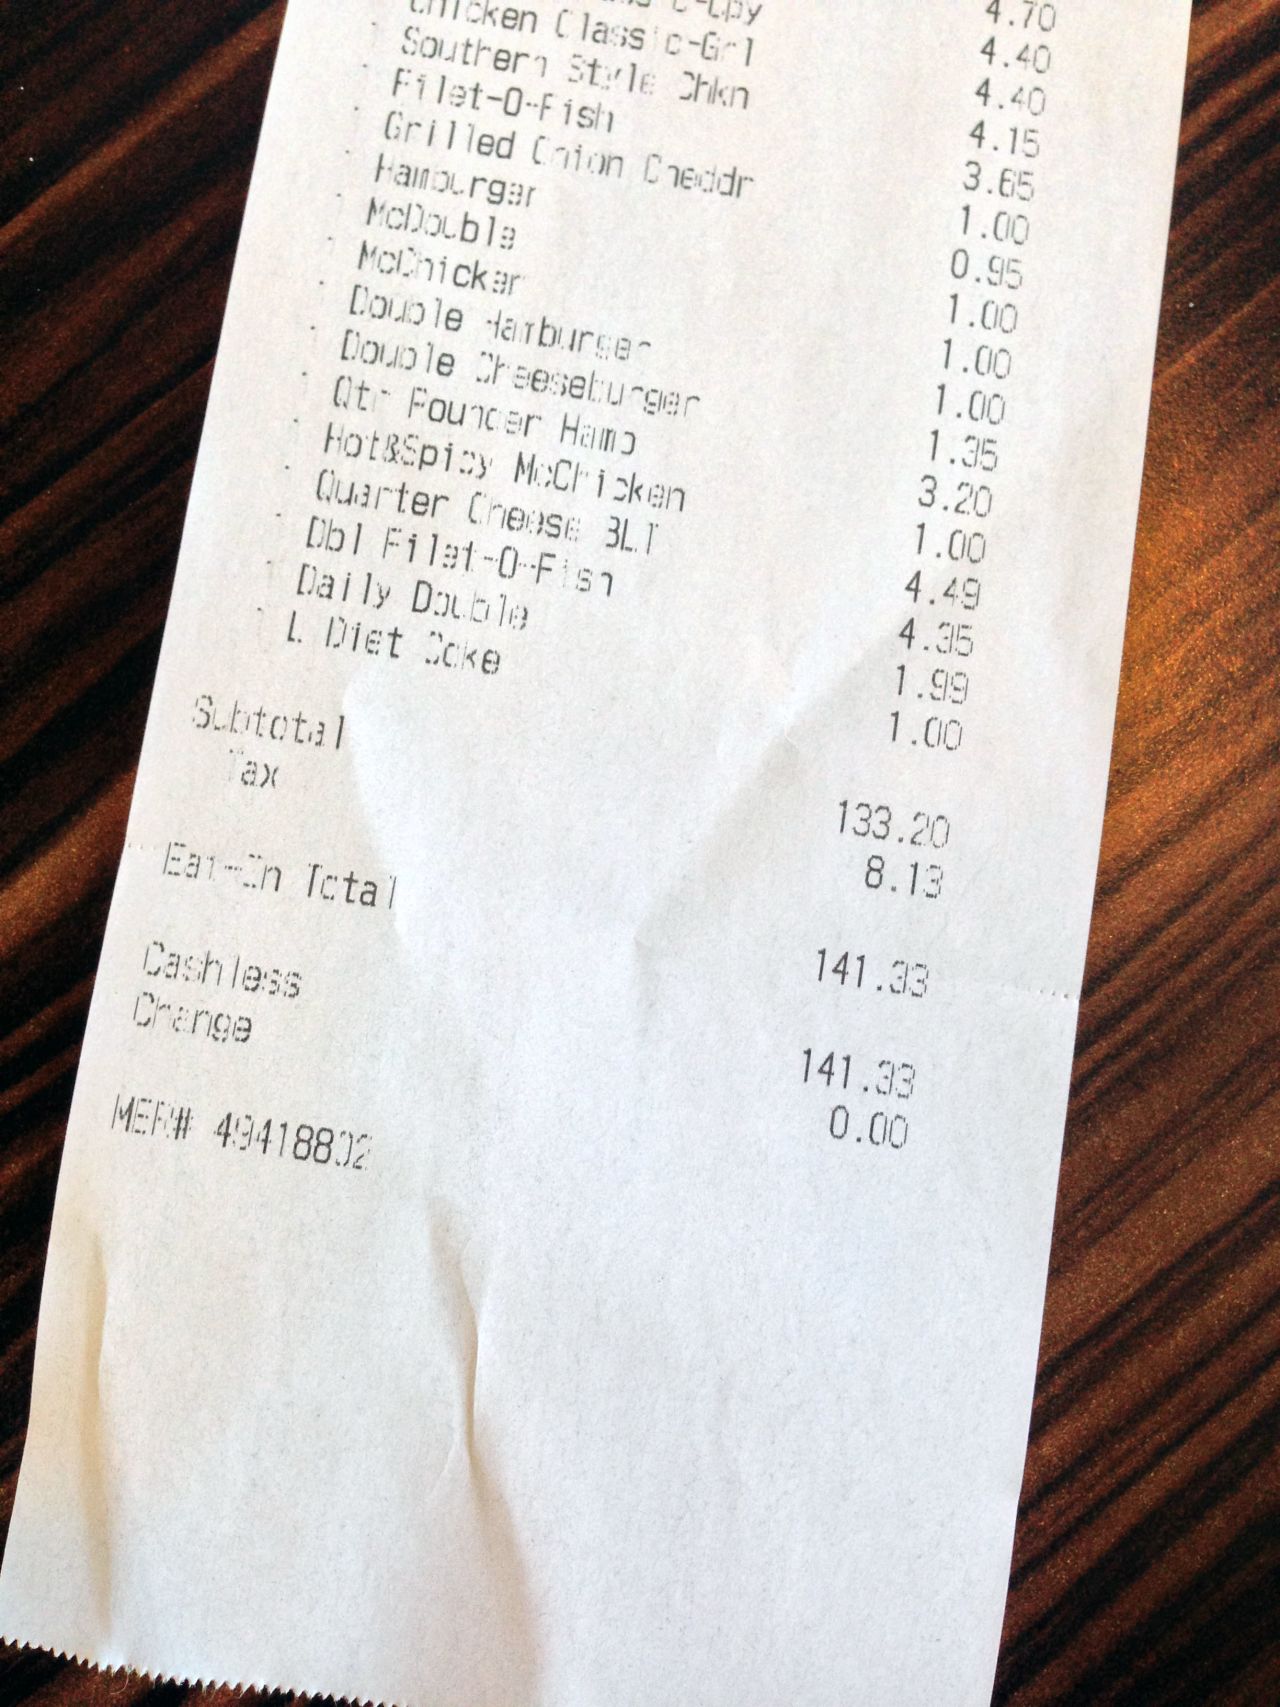 Nick Chipman always dreamed of  making a "McEverything" from every sandwich on the menu. For $141.33, he made it come true.